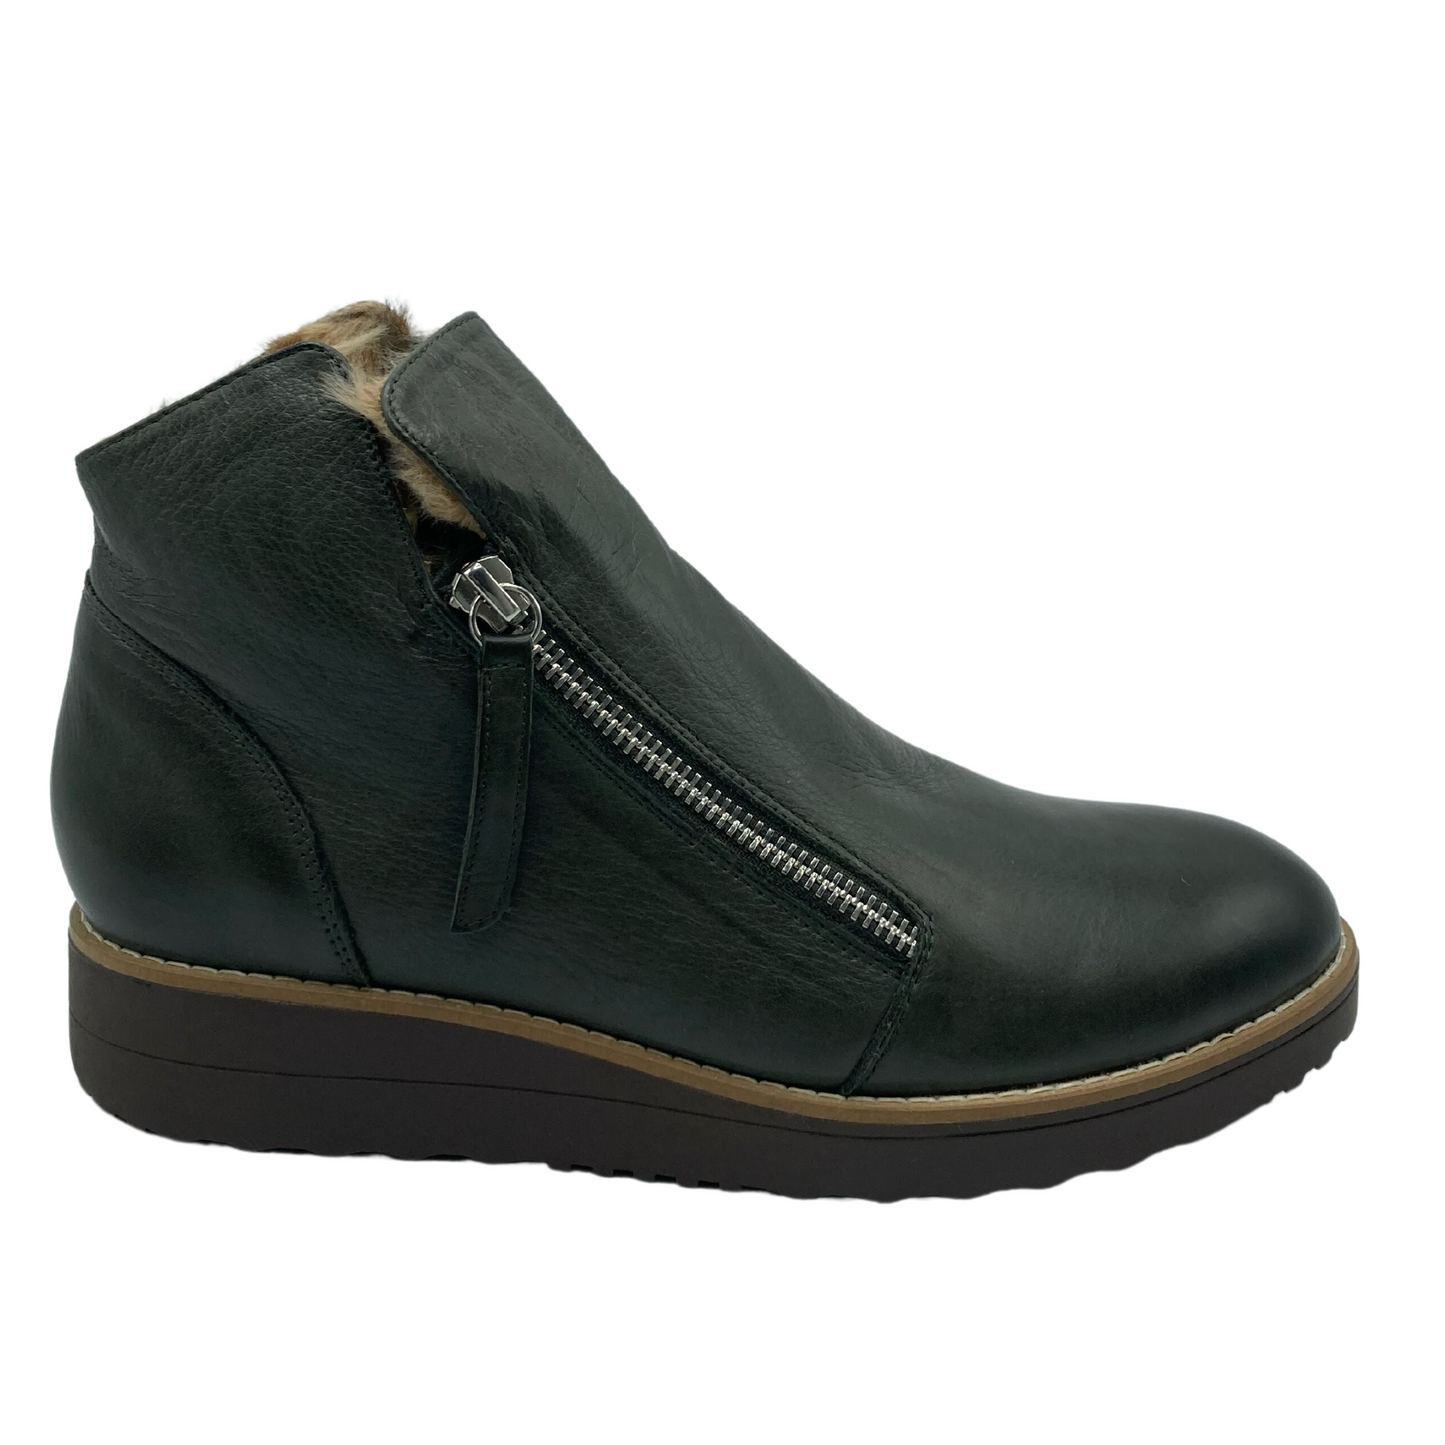 Right facing view of dark green leather ankle boot with subtle 1 inch platform and rubber sole.